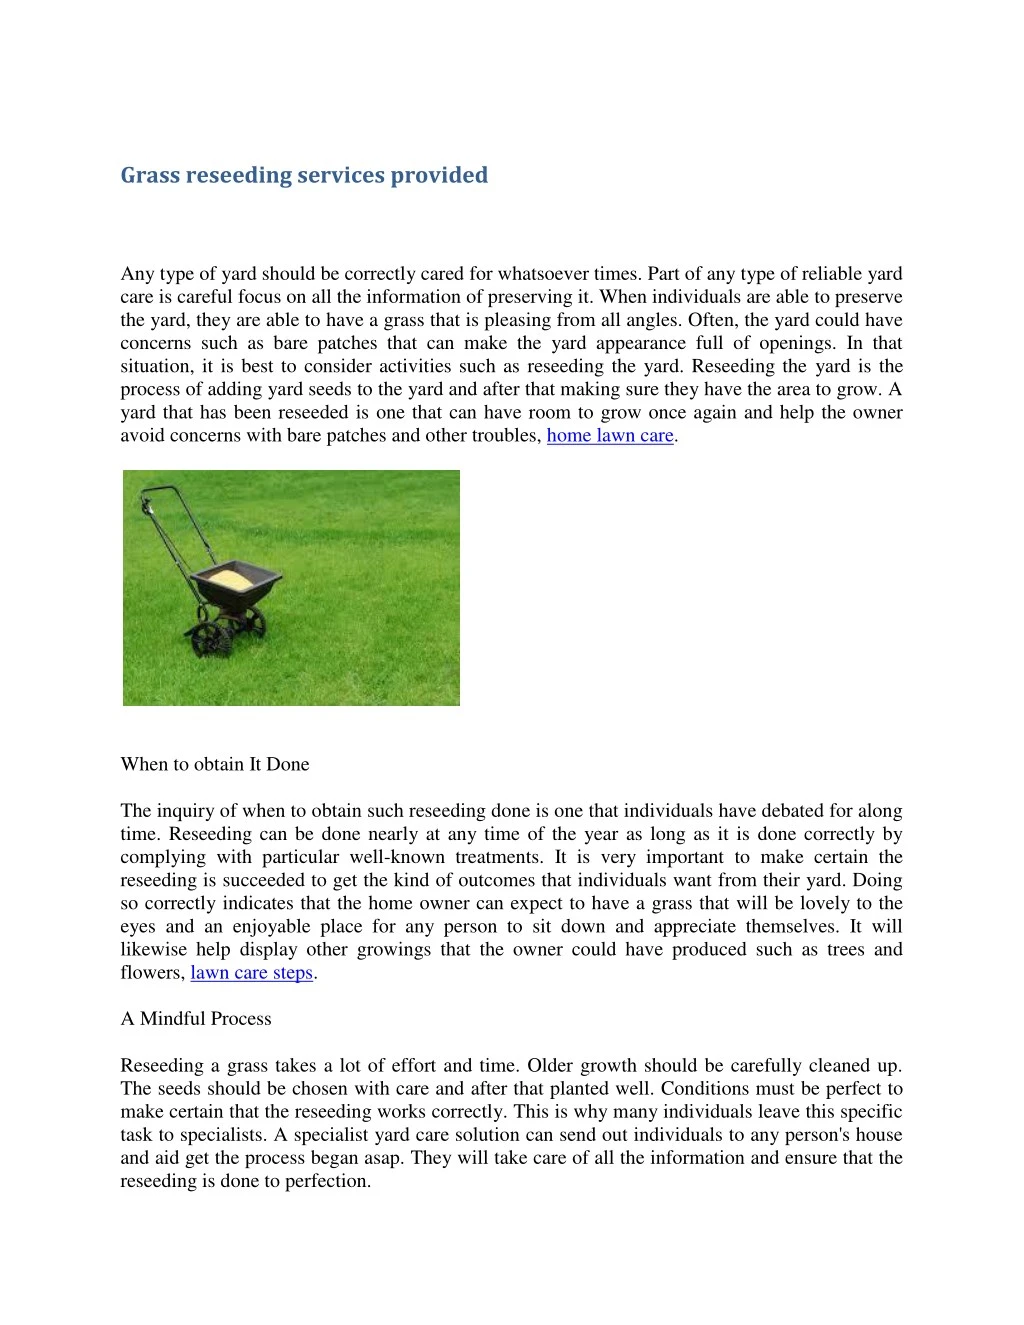 grass reseeding services provided